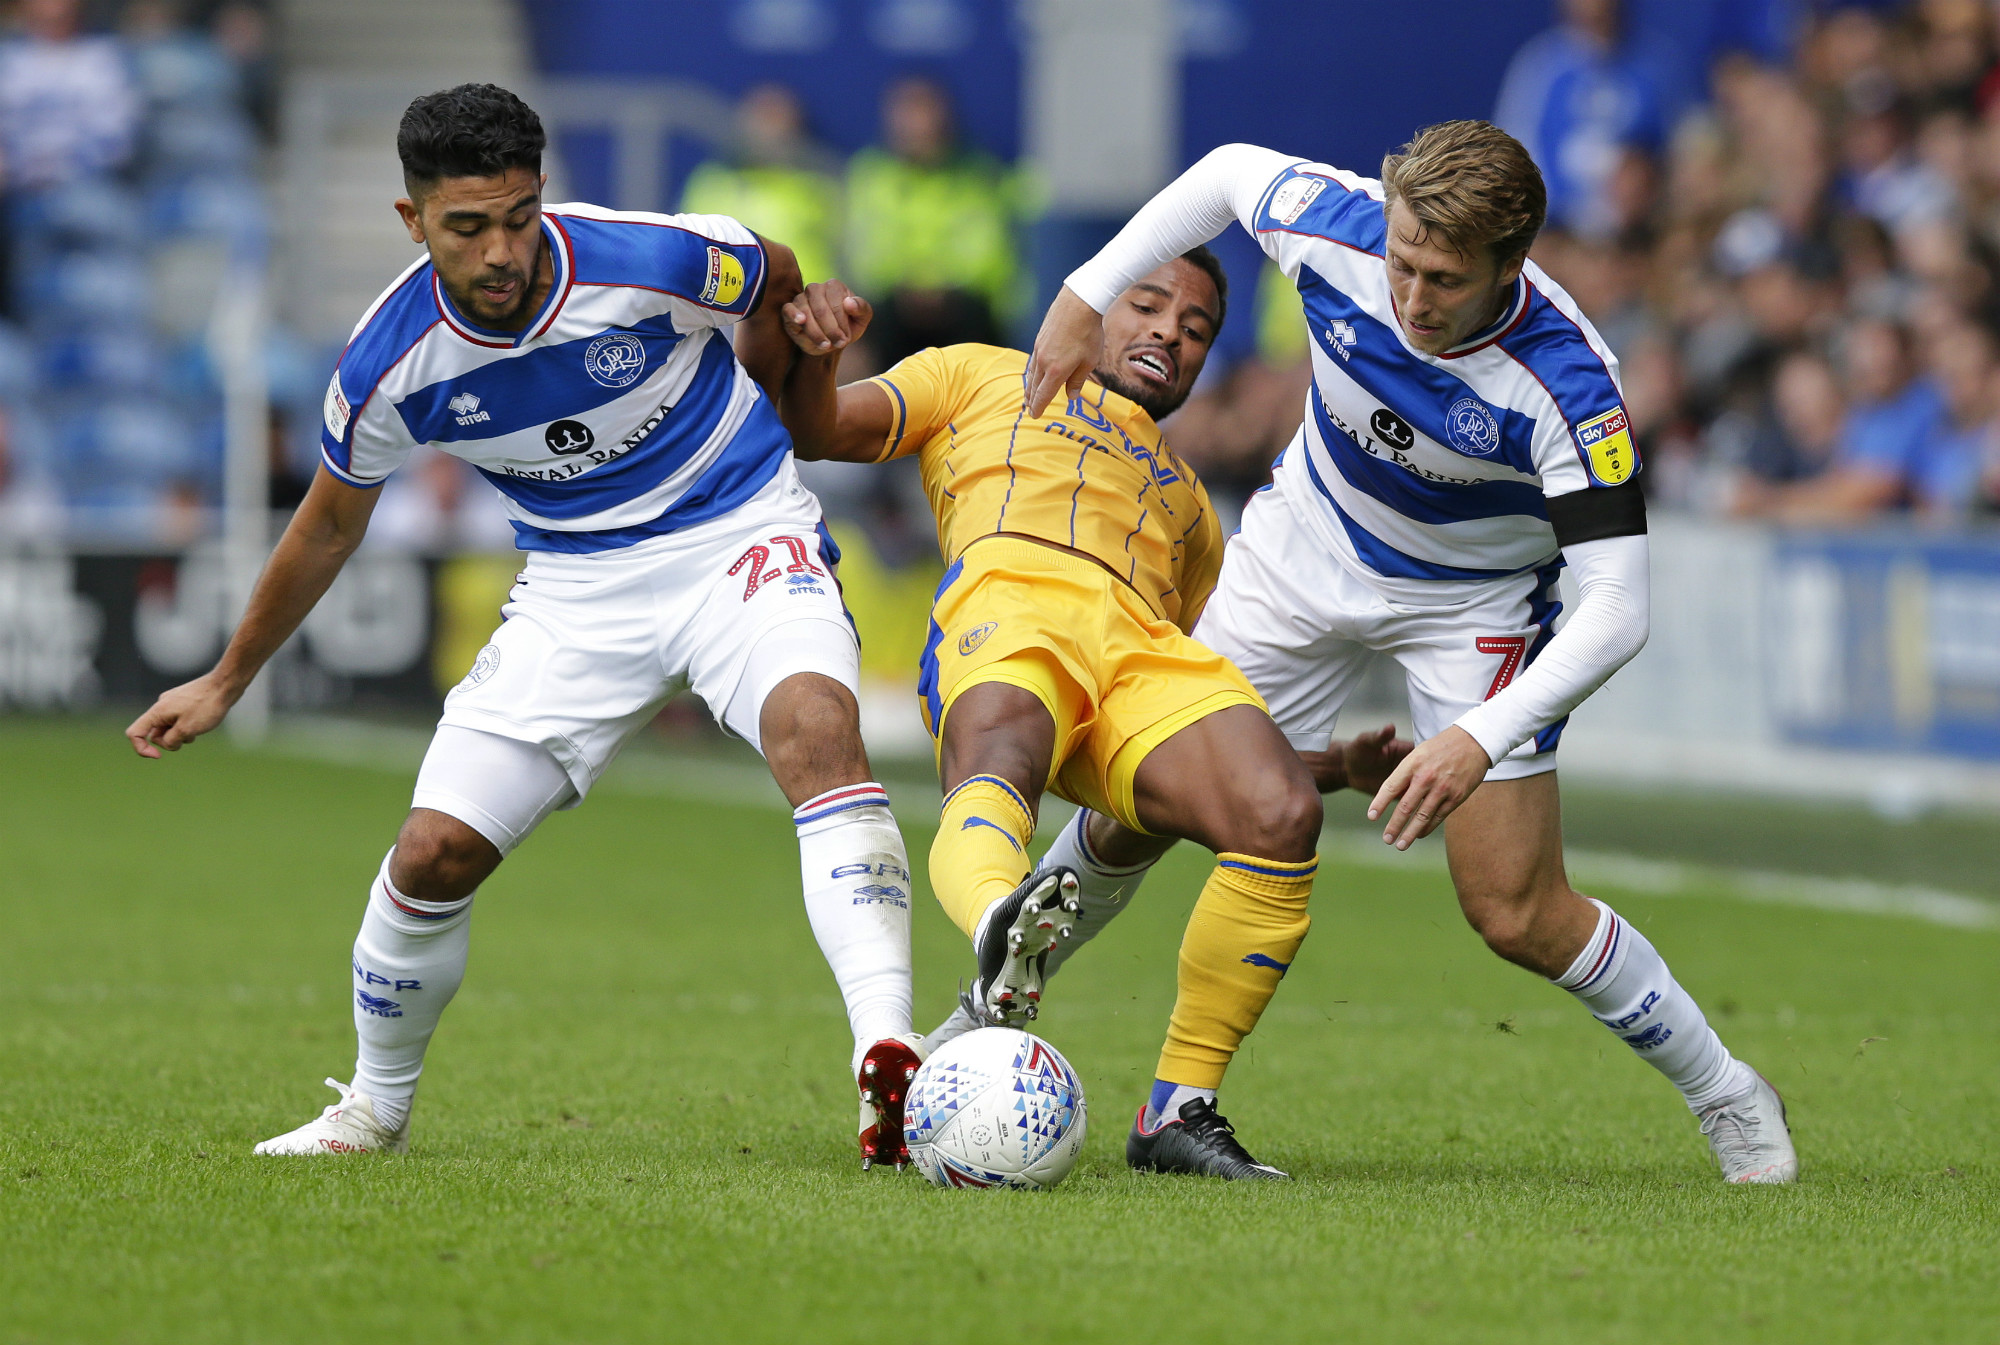 Luongo tackles against Wigan